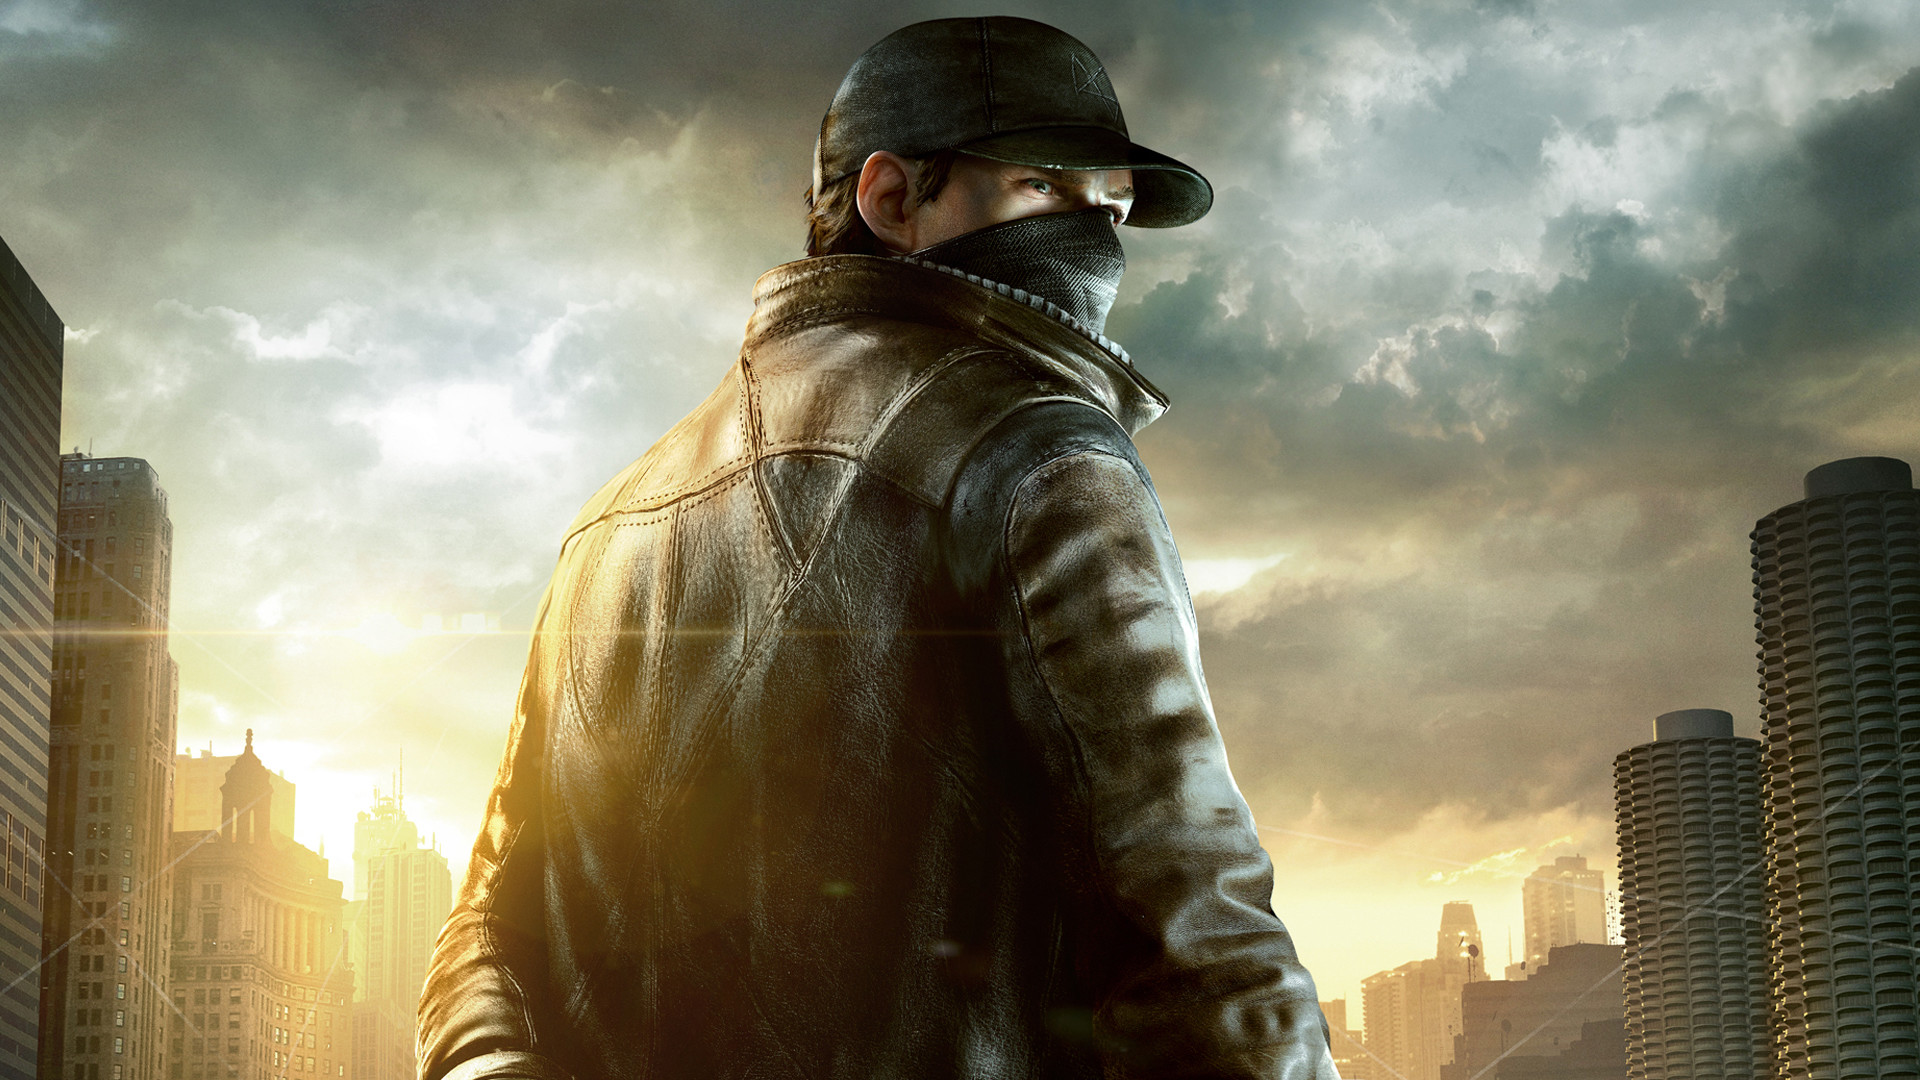 1920x1080 12 HD Watch Dogs Wallpapers